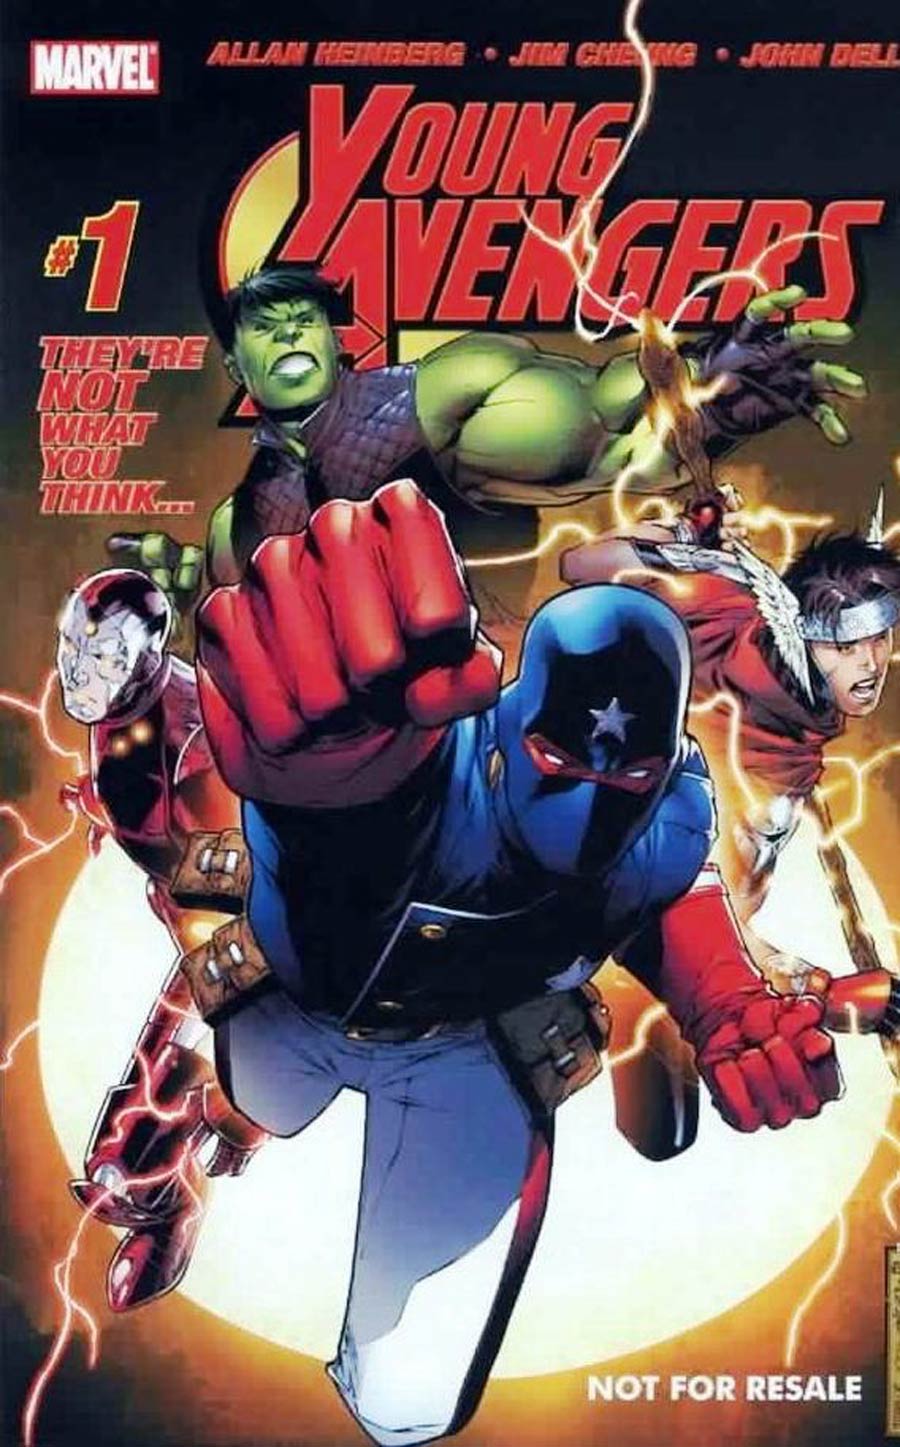 Young Avengers #1 Cover D Marvel Legends Toy Reprint